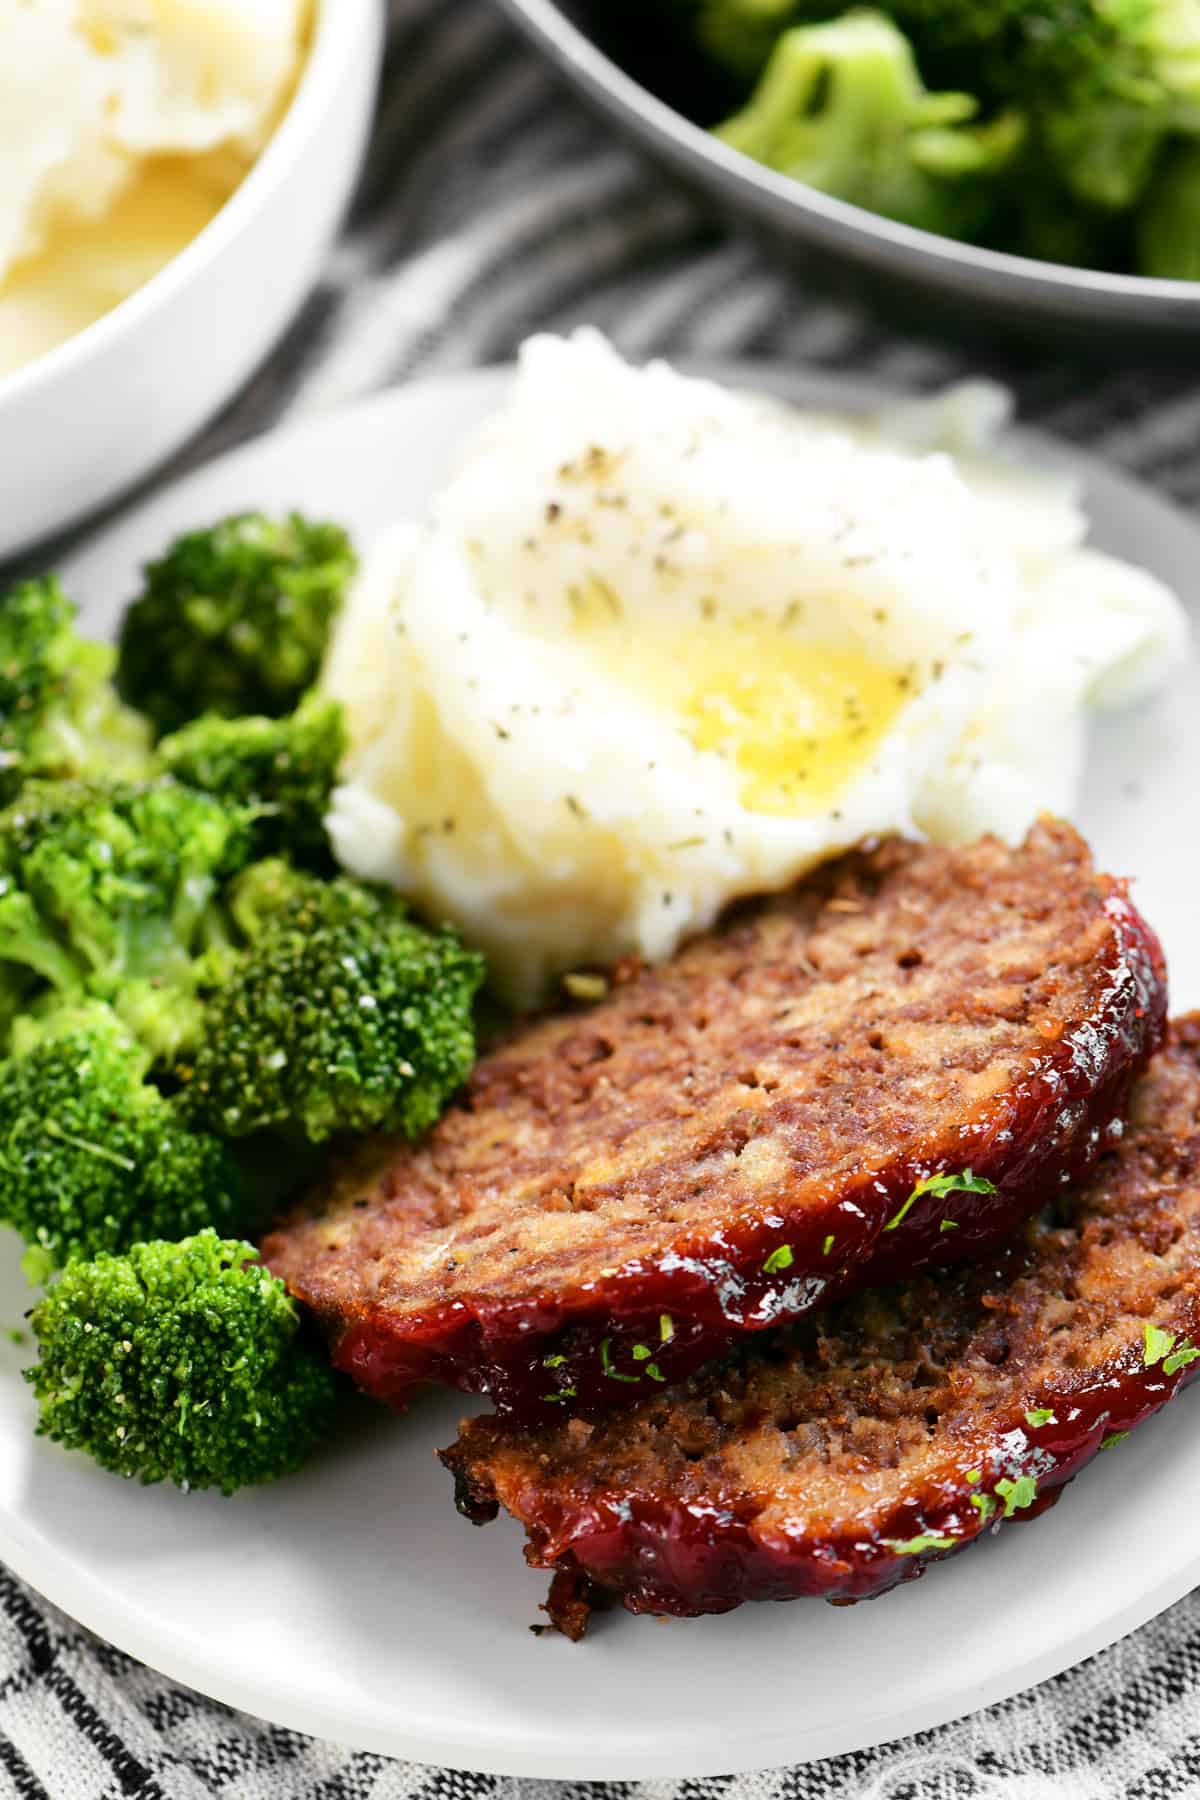 meatloaf slices on a plate with vegetables